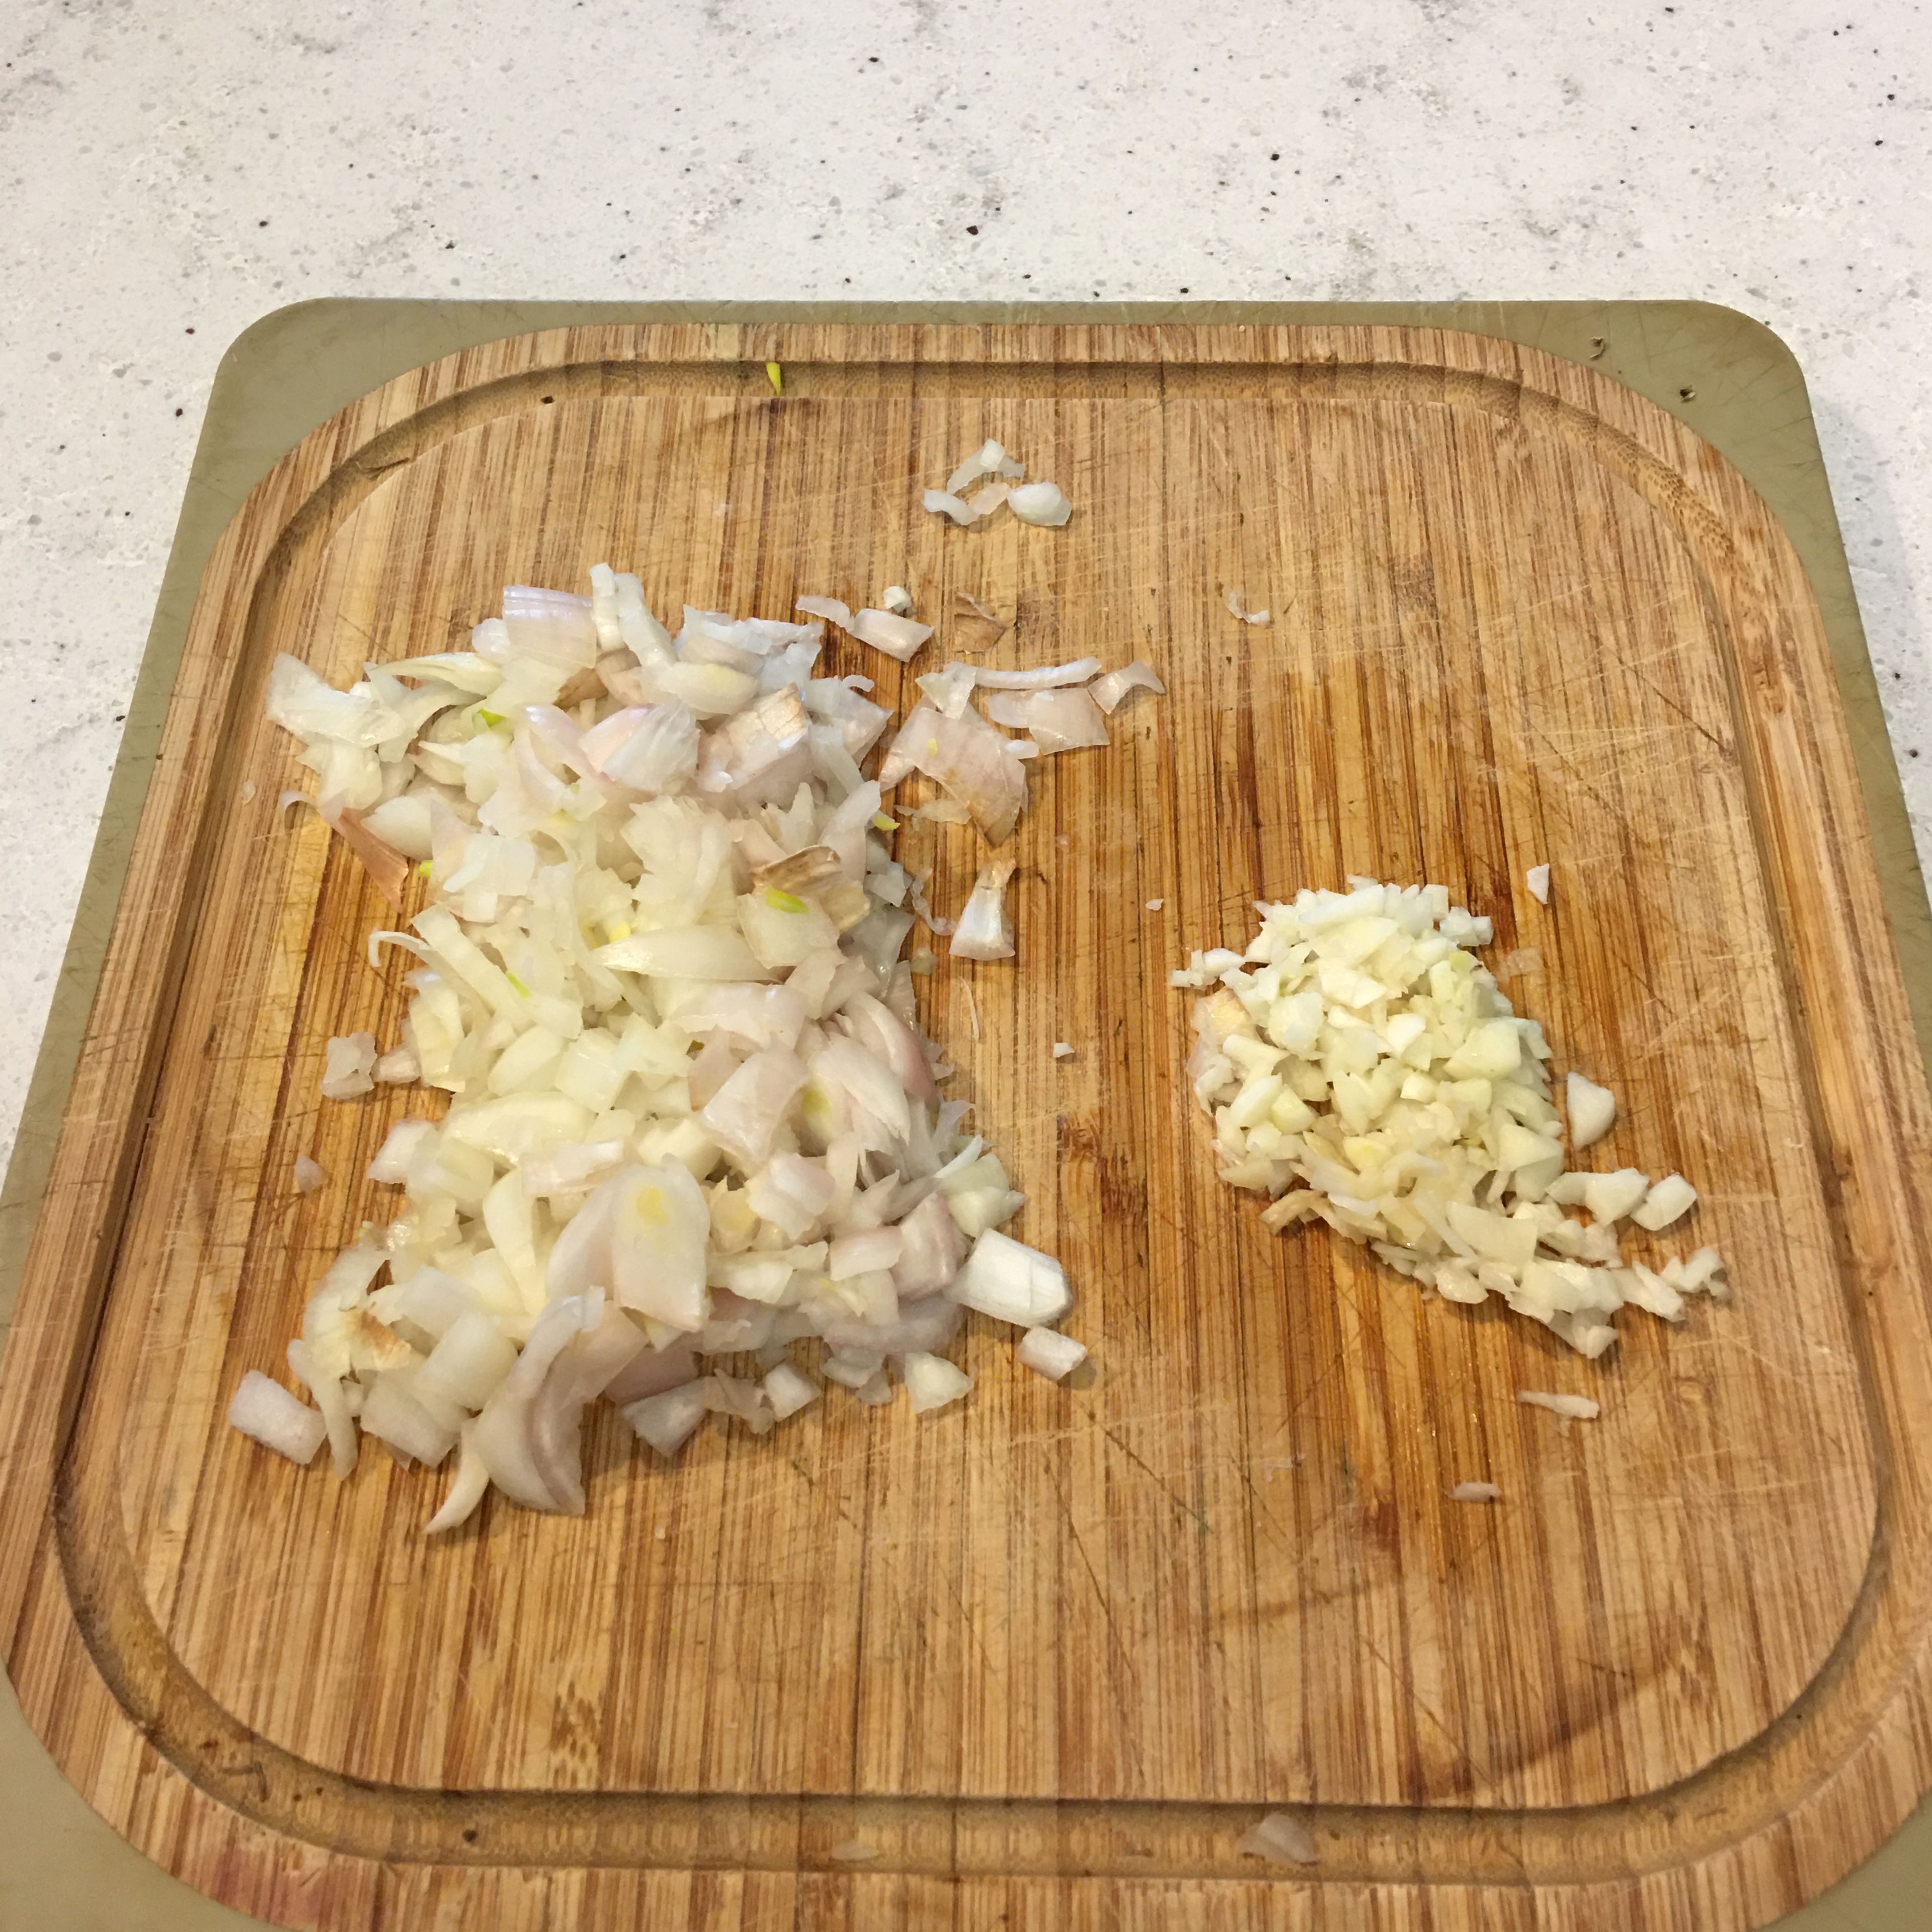 Preheat your oven to 180° Celcius. Chop the onion and mince the garlic.